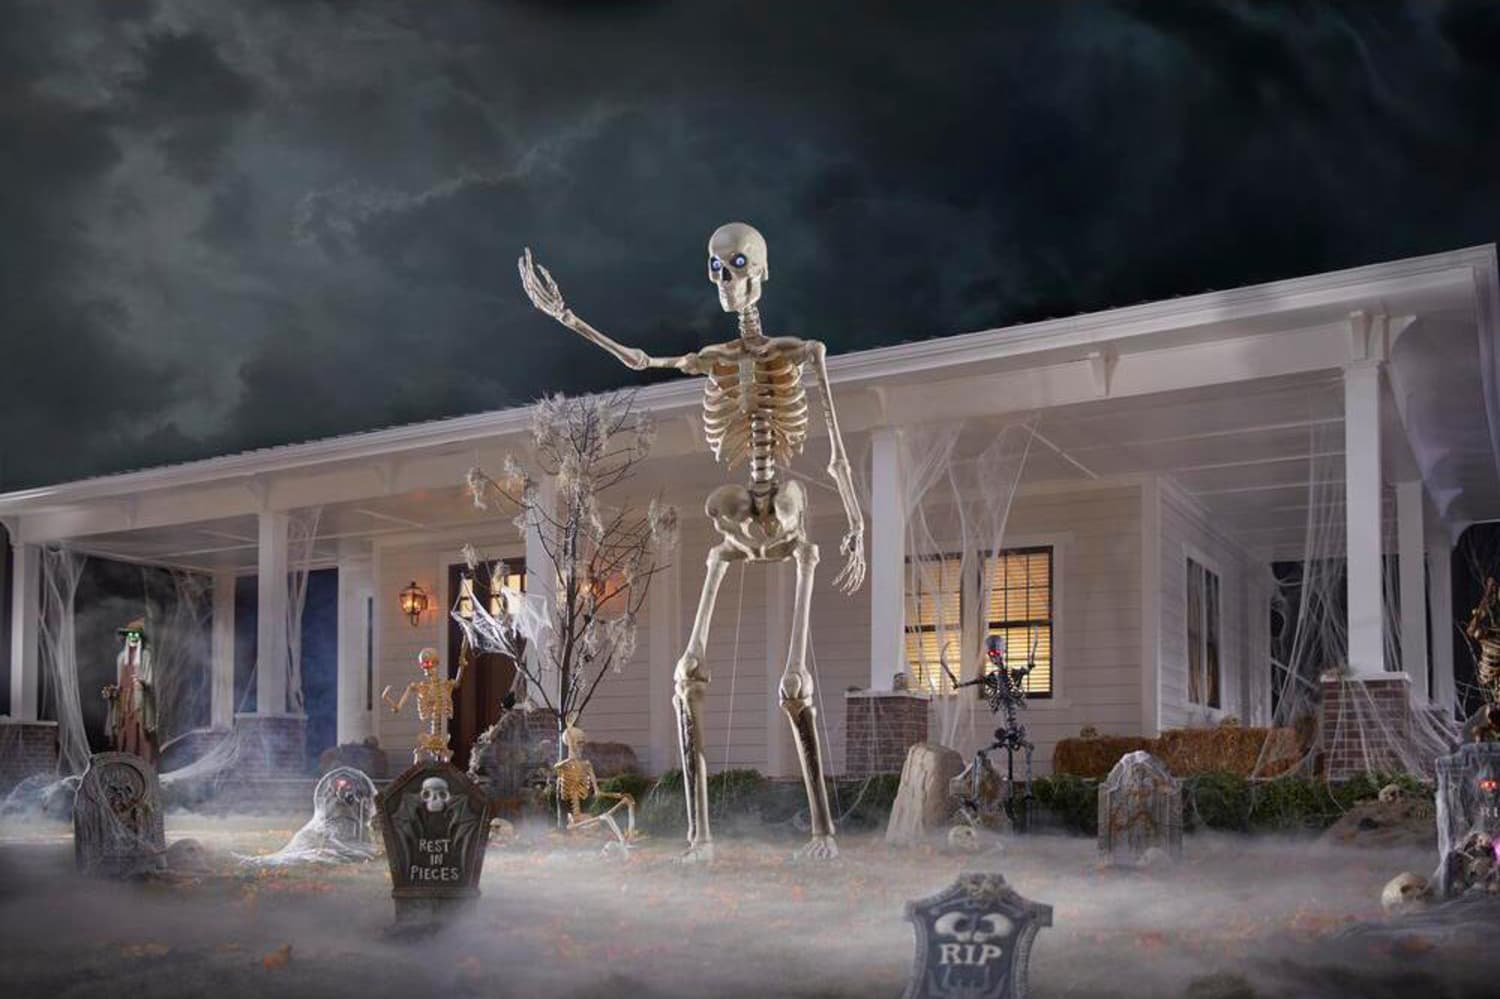 Home Depot’s 12-Foot-Tall Skeleton Is the Star of Halloween Memes